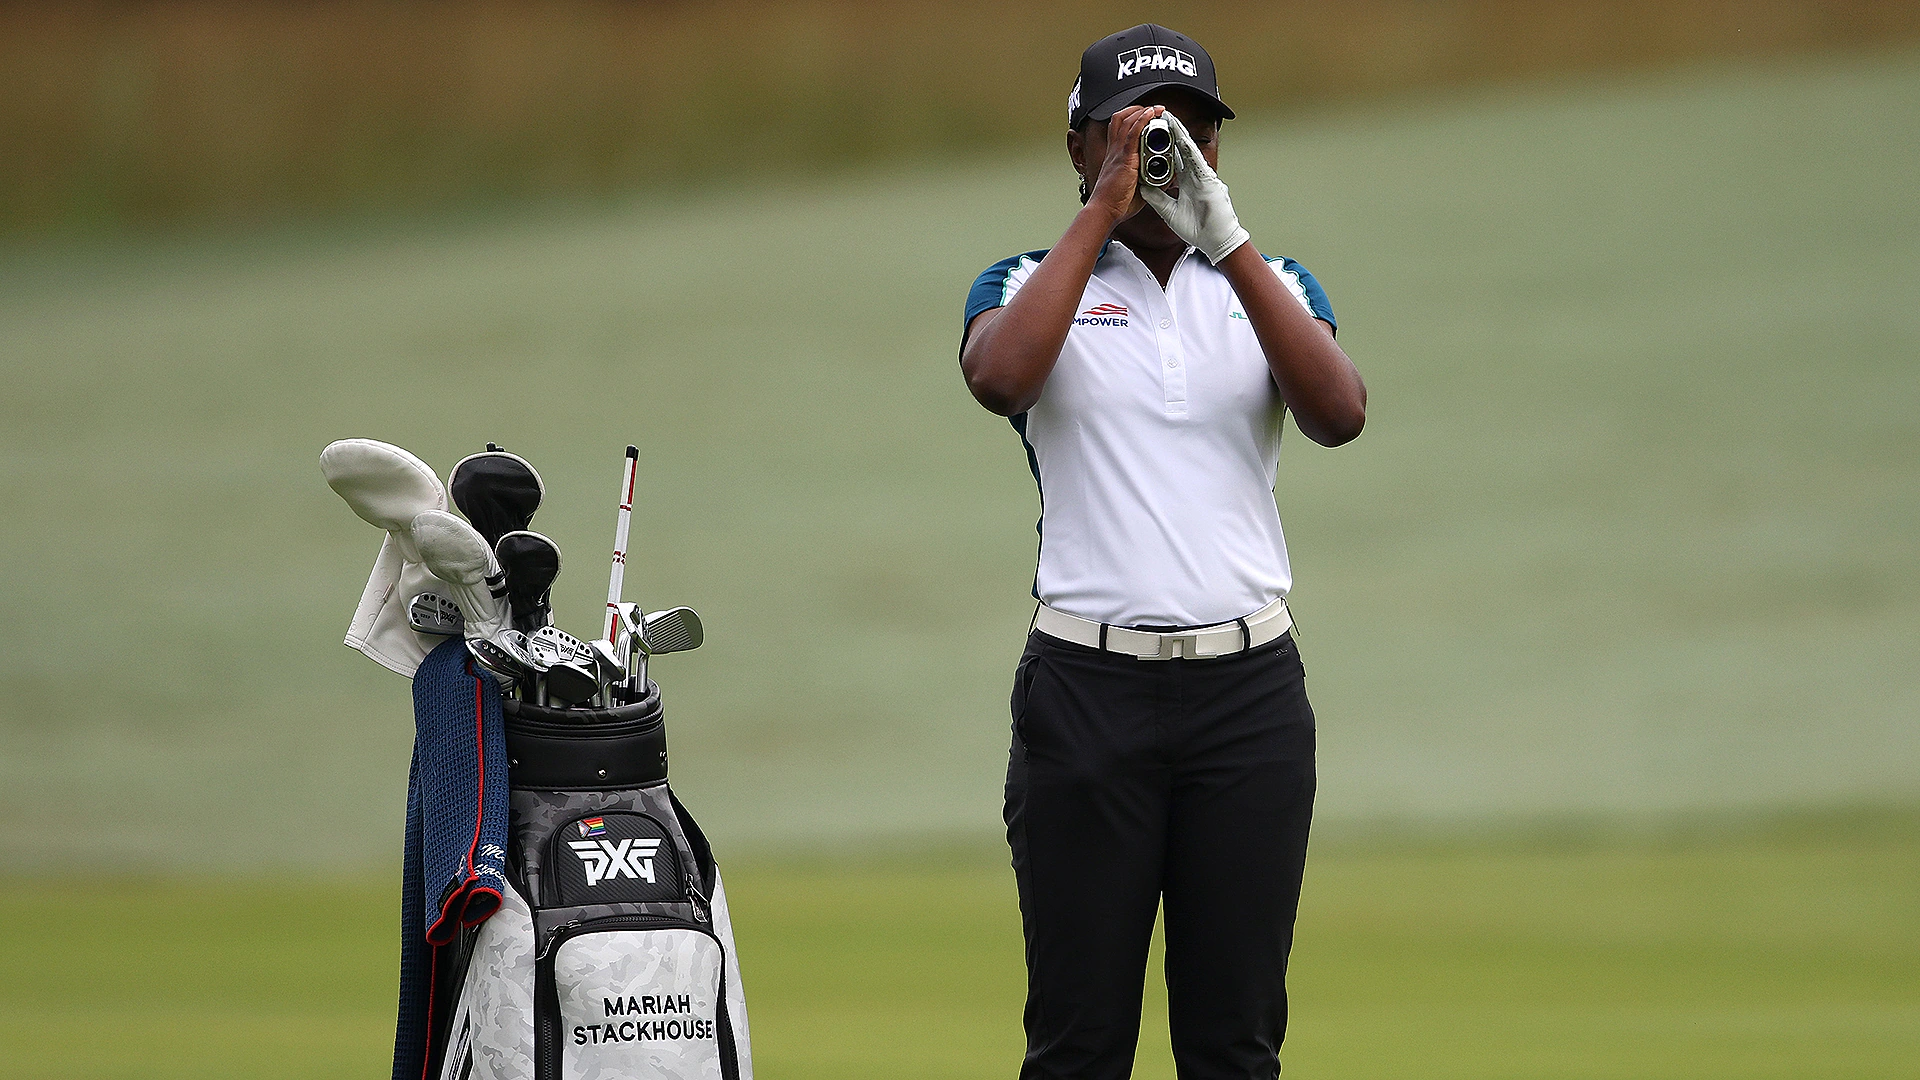 Rangefinders in use at KPMG Women’s PGA and opinions already vary